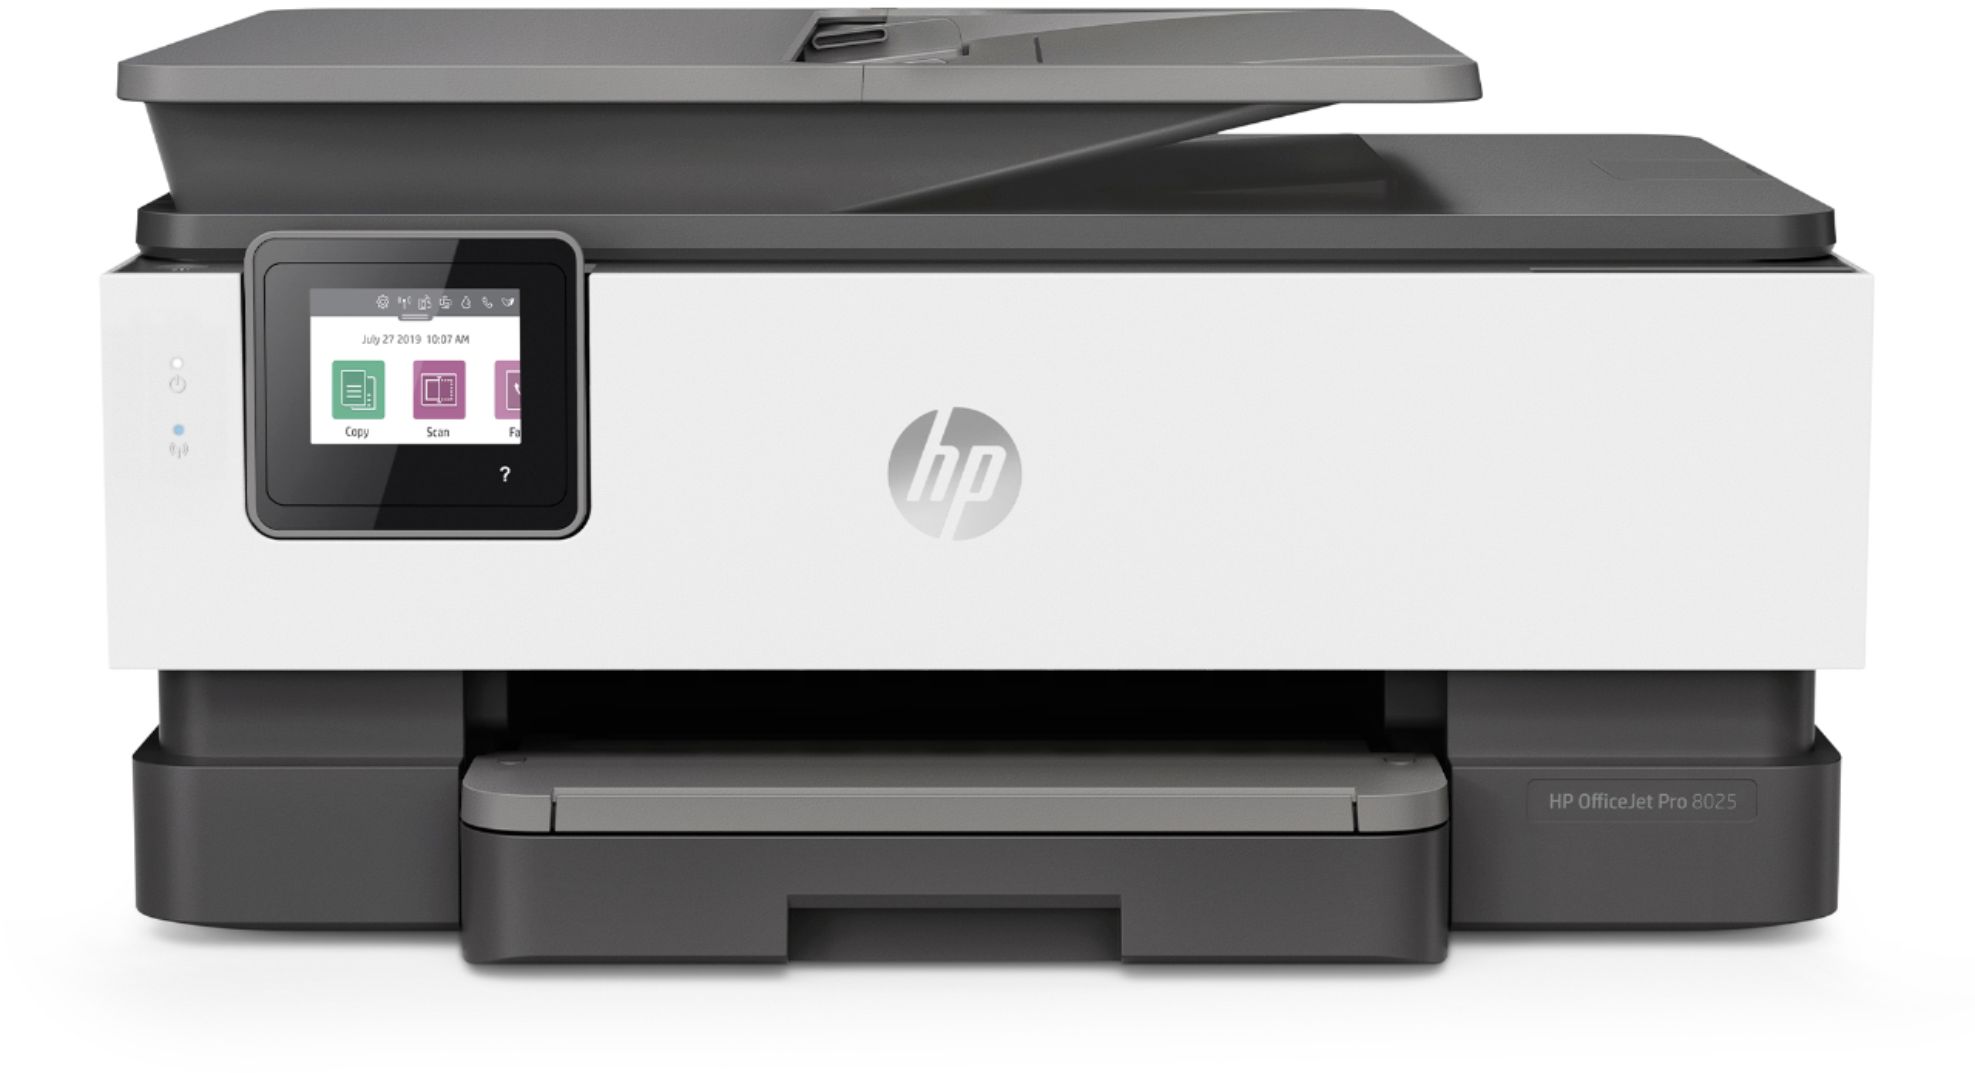 Best Buy: HP OfficeJet Pro 8025 Wireless Instant Ready Printer with 6-Month Instant Ink Subscription Gray/White 1KR57A#742